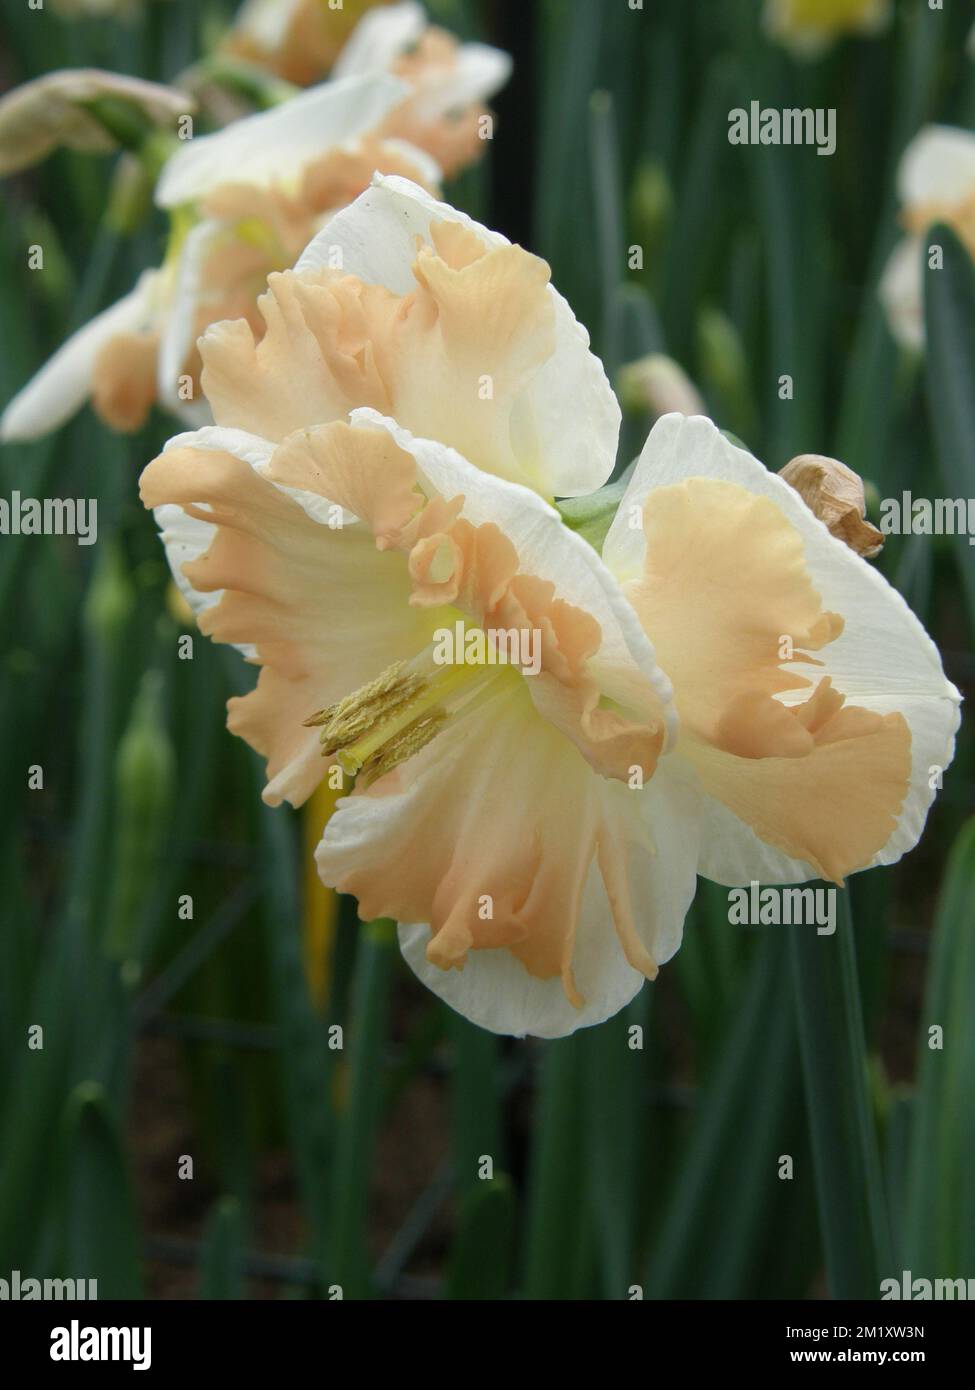 White and pink Collar daffodils (Narcissus) Chapelet bloom in a garden in March Stock Photo